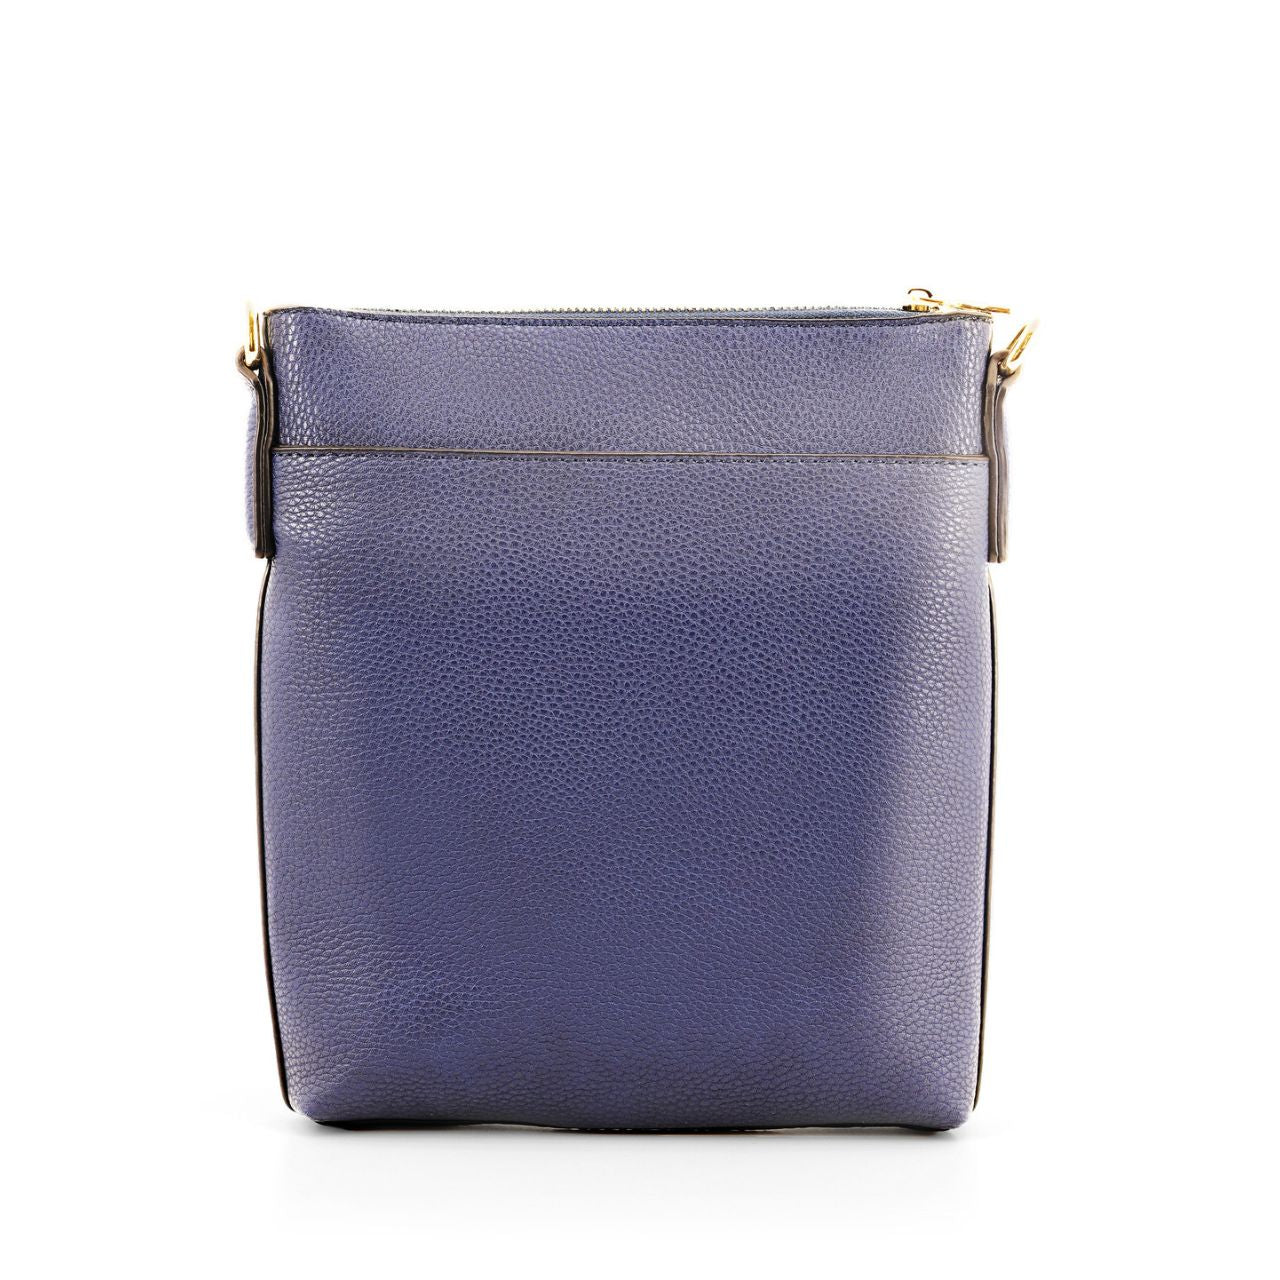 Tipperary Crystal Chelsea Cross Body Pouch - Navy New 2022  The Chelsea Cross Body Pouch Navy  - Rose gold hardware The versatile and trendy Chelsea can be worn as a cross body and also over the shoulder. The Chelsea has an adjustable strap and easily accessible outside pocket and secure front zip pocket. Metal hardware detail finish off this stylish bag in rose gold or yellow gold.